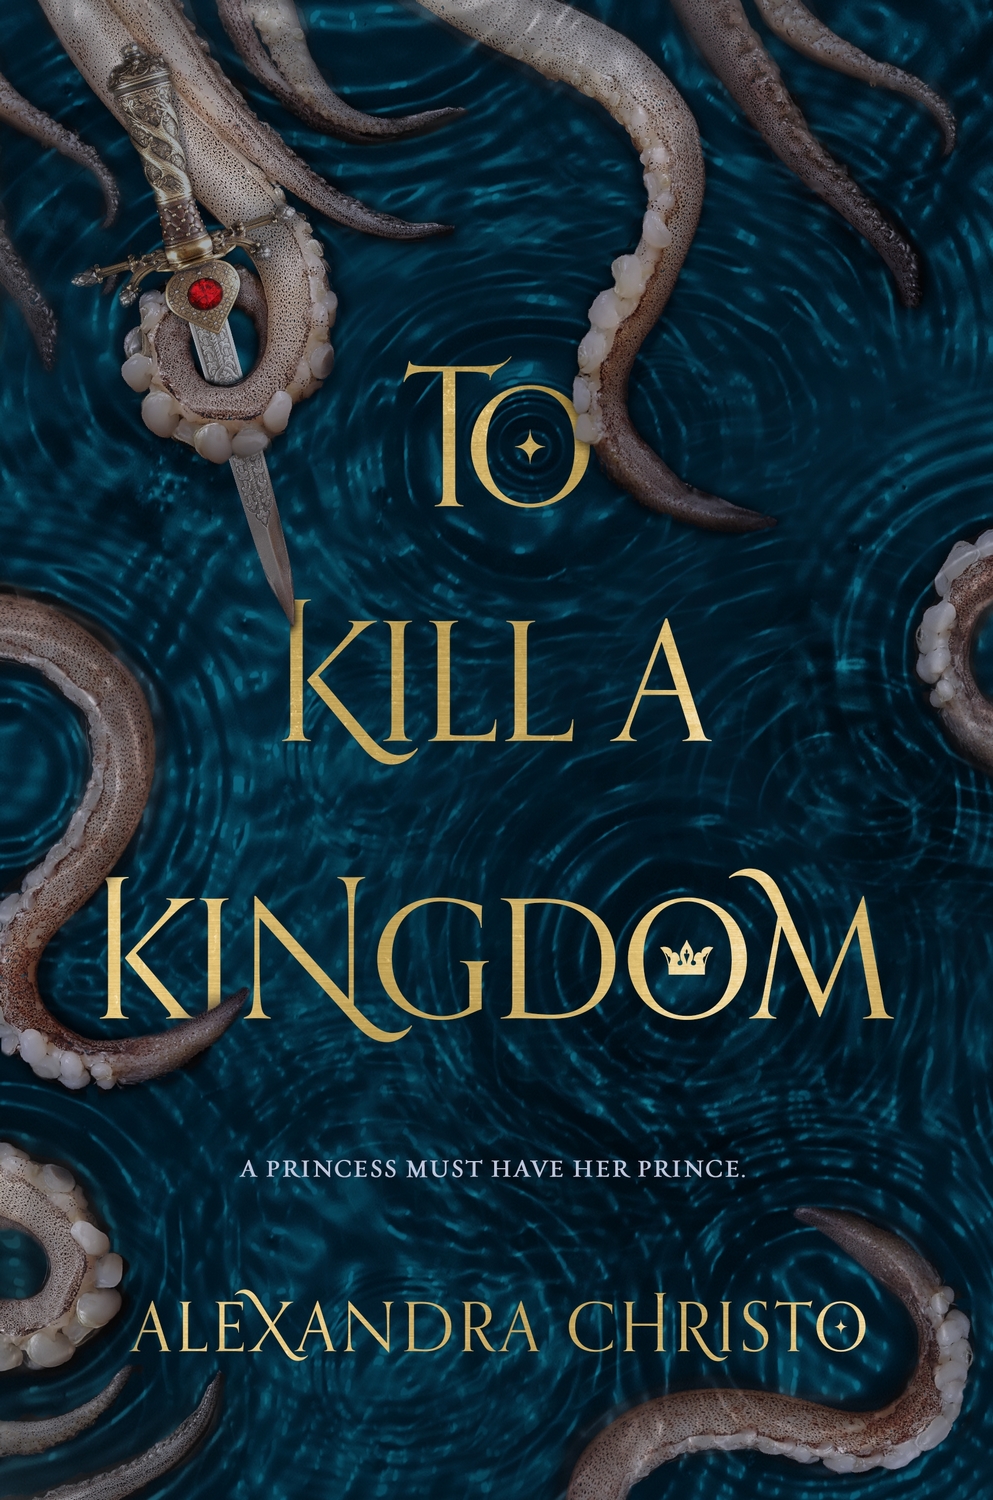 Book Review and Giveaway: “To Kill a Kingdom” by Alexandra Christo